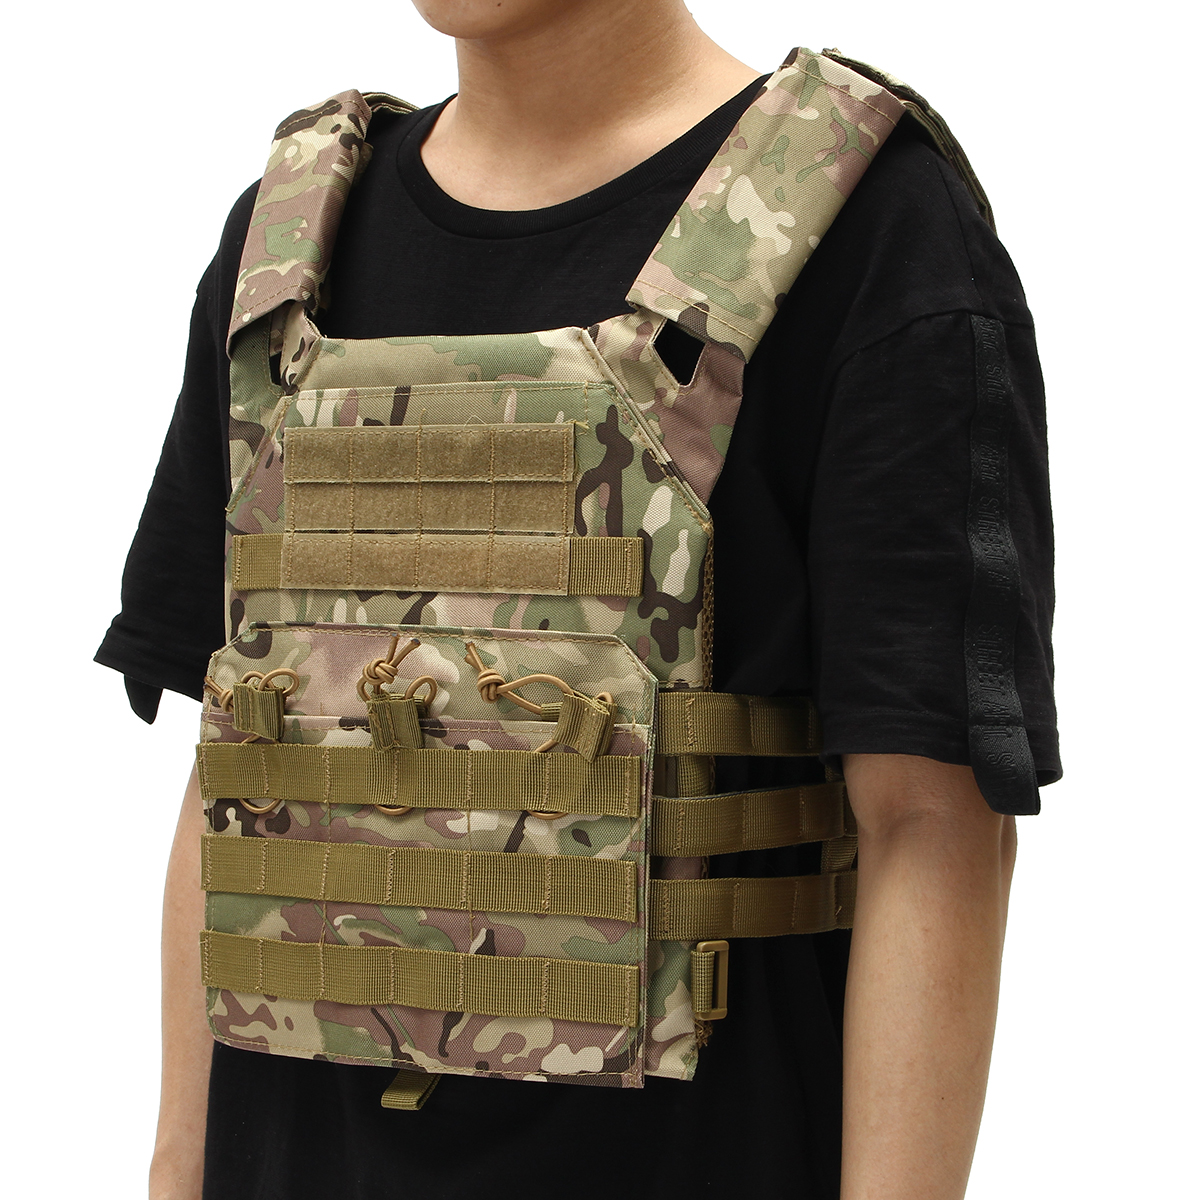 Outdoor-Molle-System-Tactical-Vest-Ultra-Light-Breathable-Adjustable-Armor-Plate-Vest-with-Pouches-1691276-9